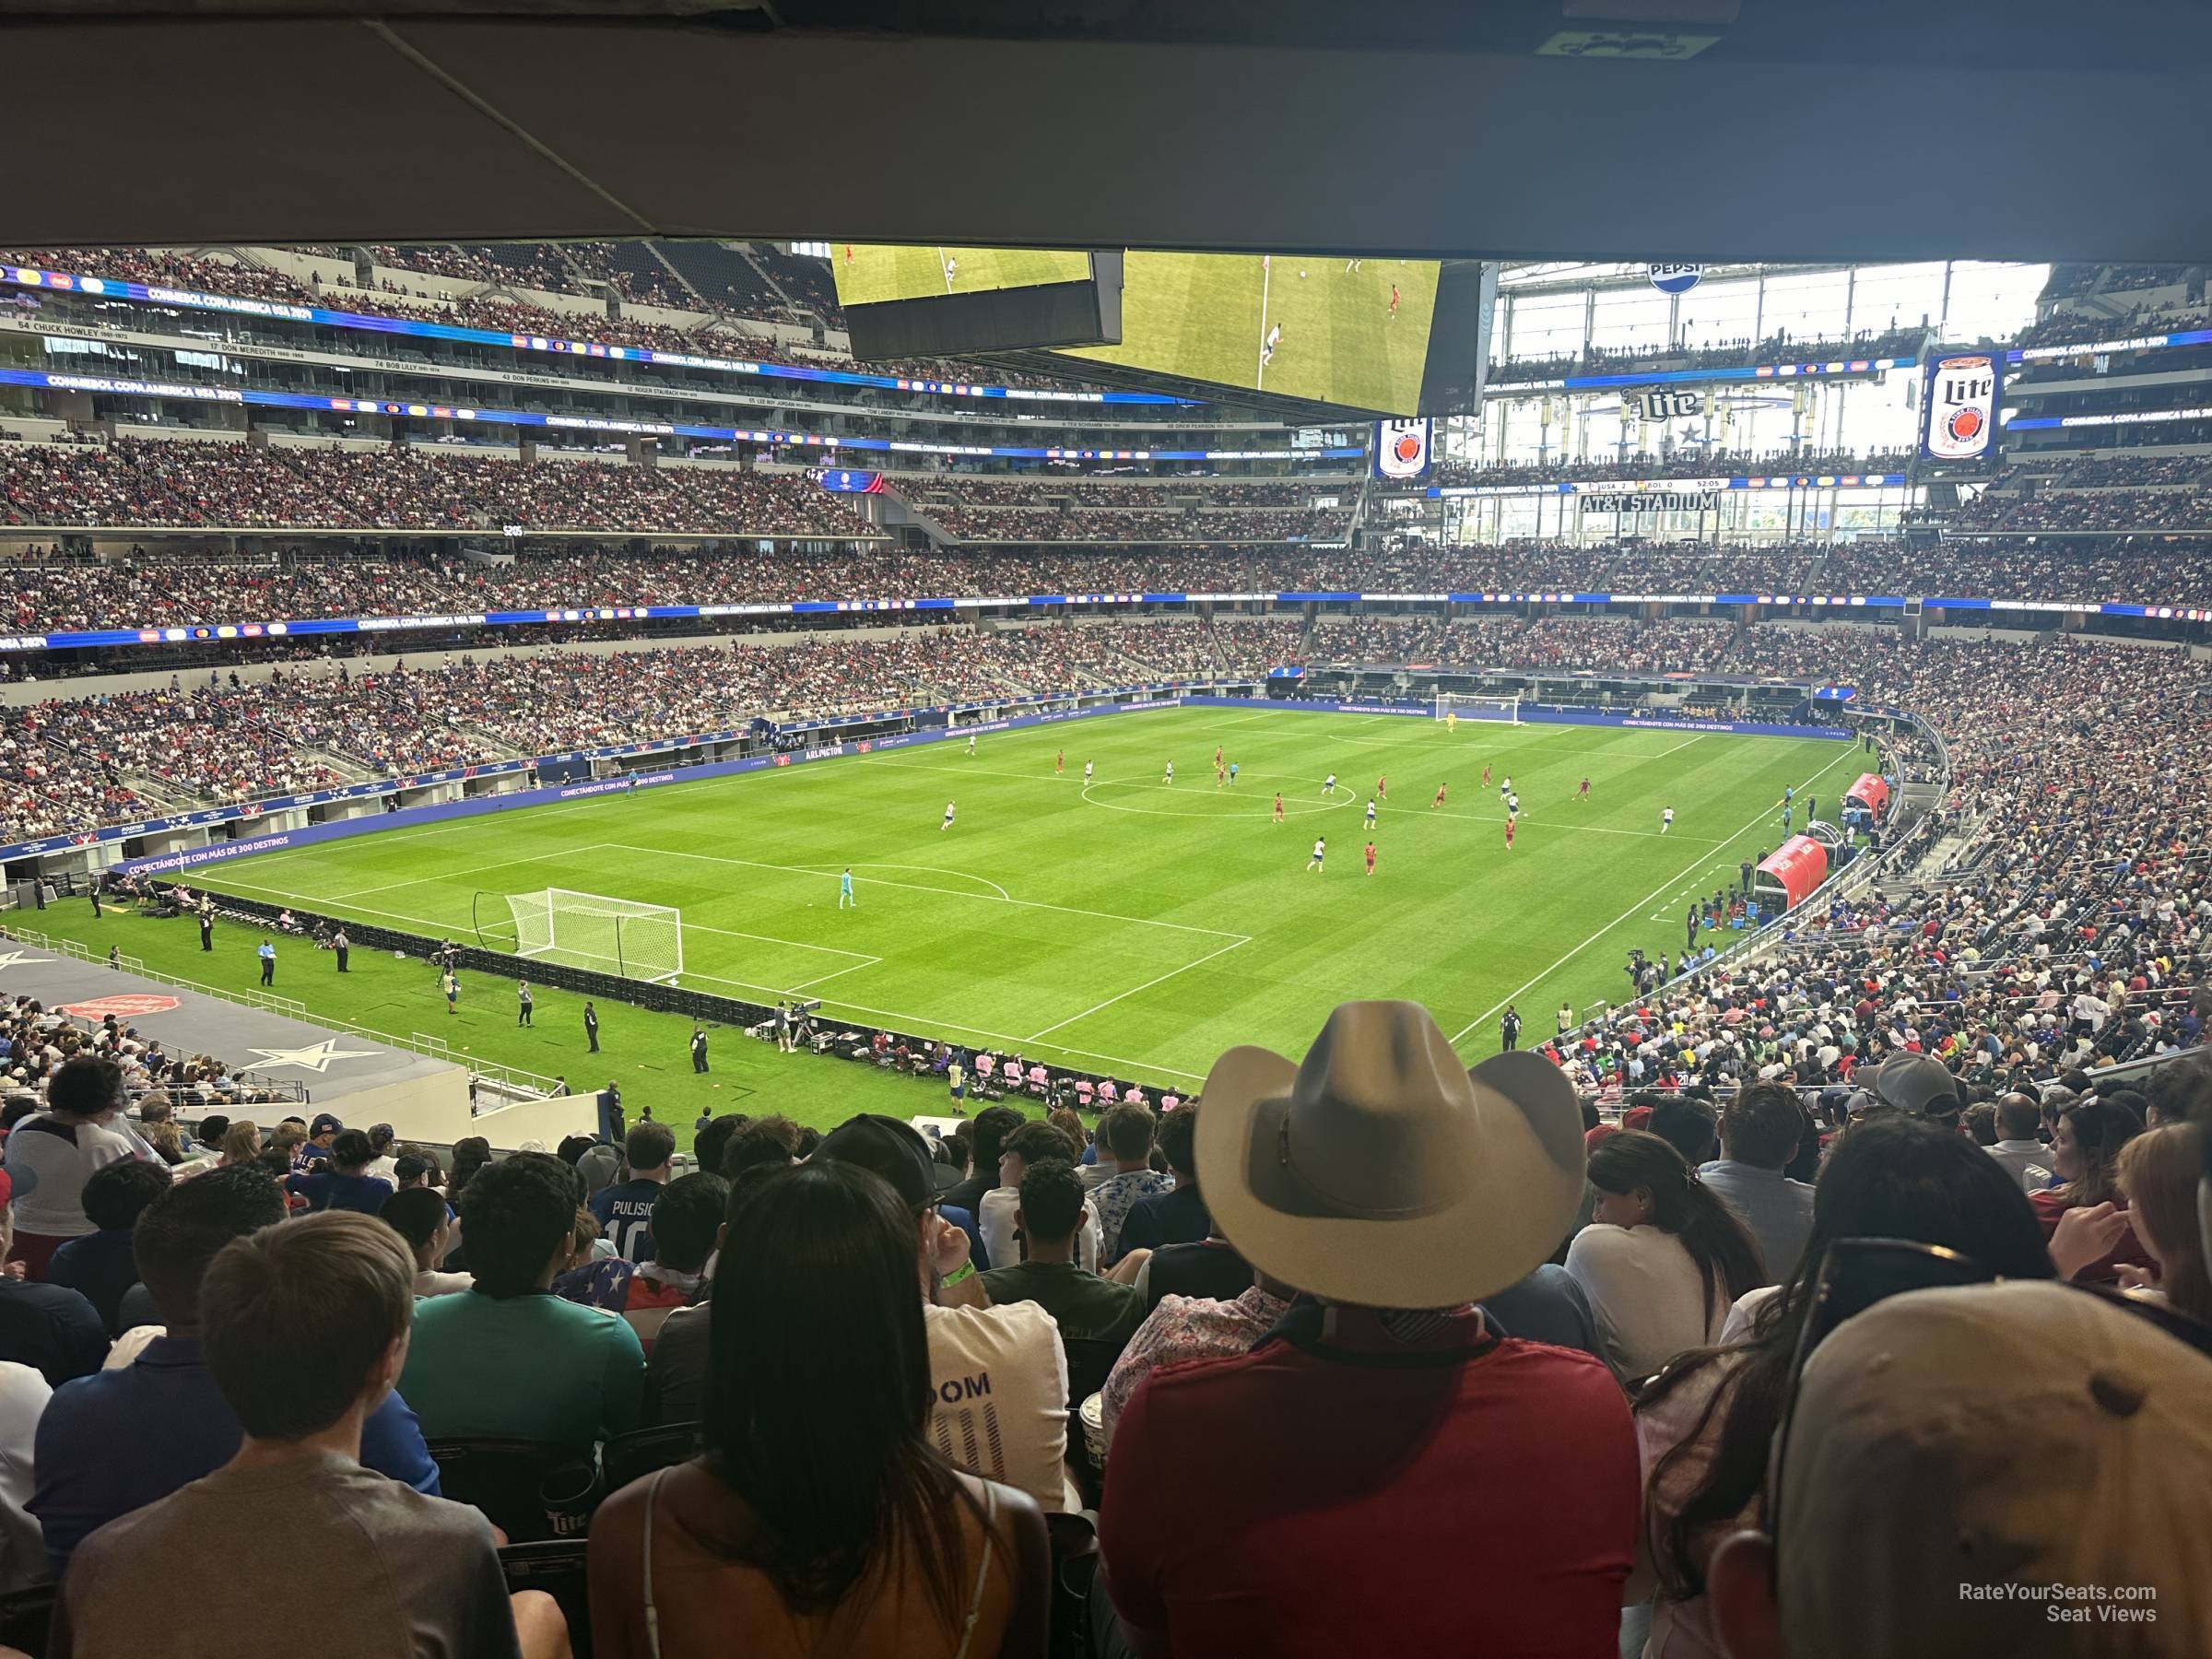 section 243, row 15 seat view  for soccer - at&t stadium (cowboys stadium)